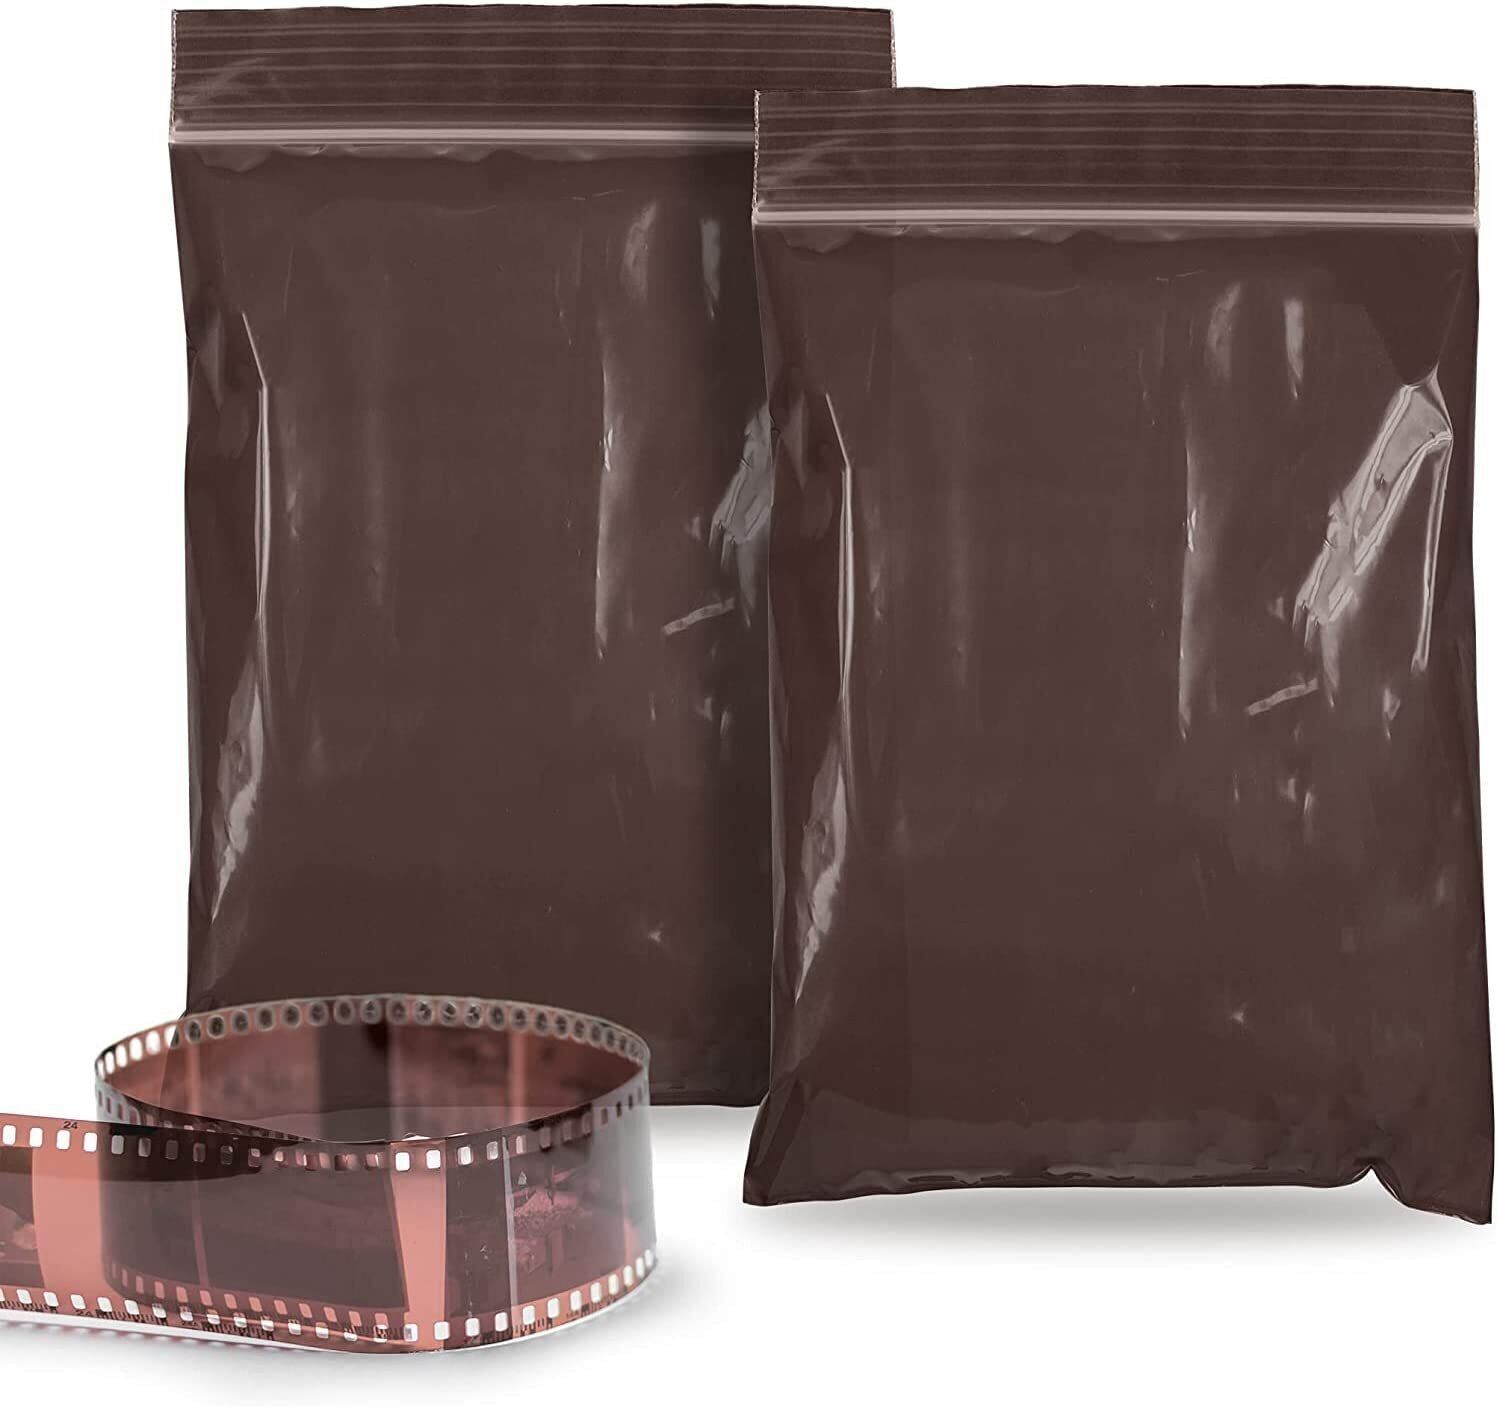 Primary image for Amber Zip Bags 2.5 x 9, Brown Poly Zip Bags for Storage 1000 Pack 3 Mil